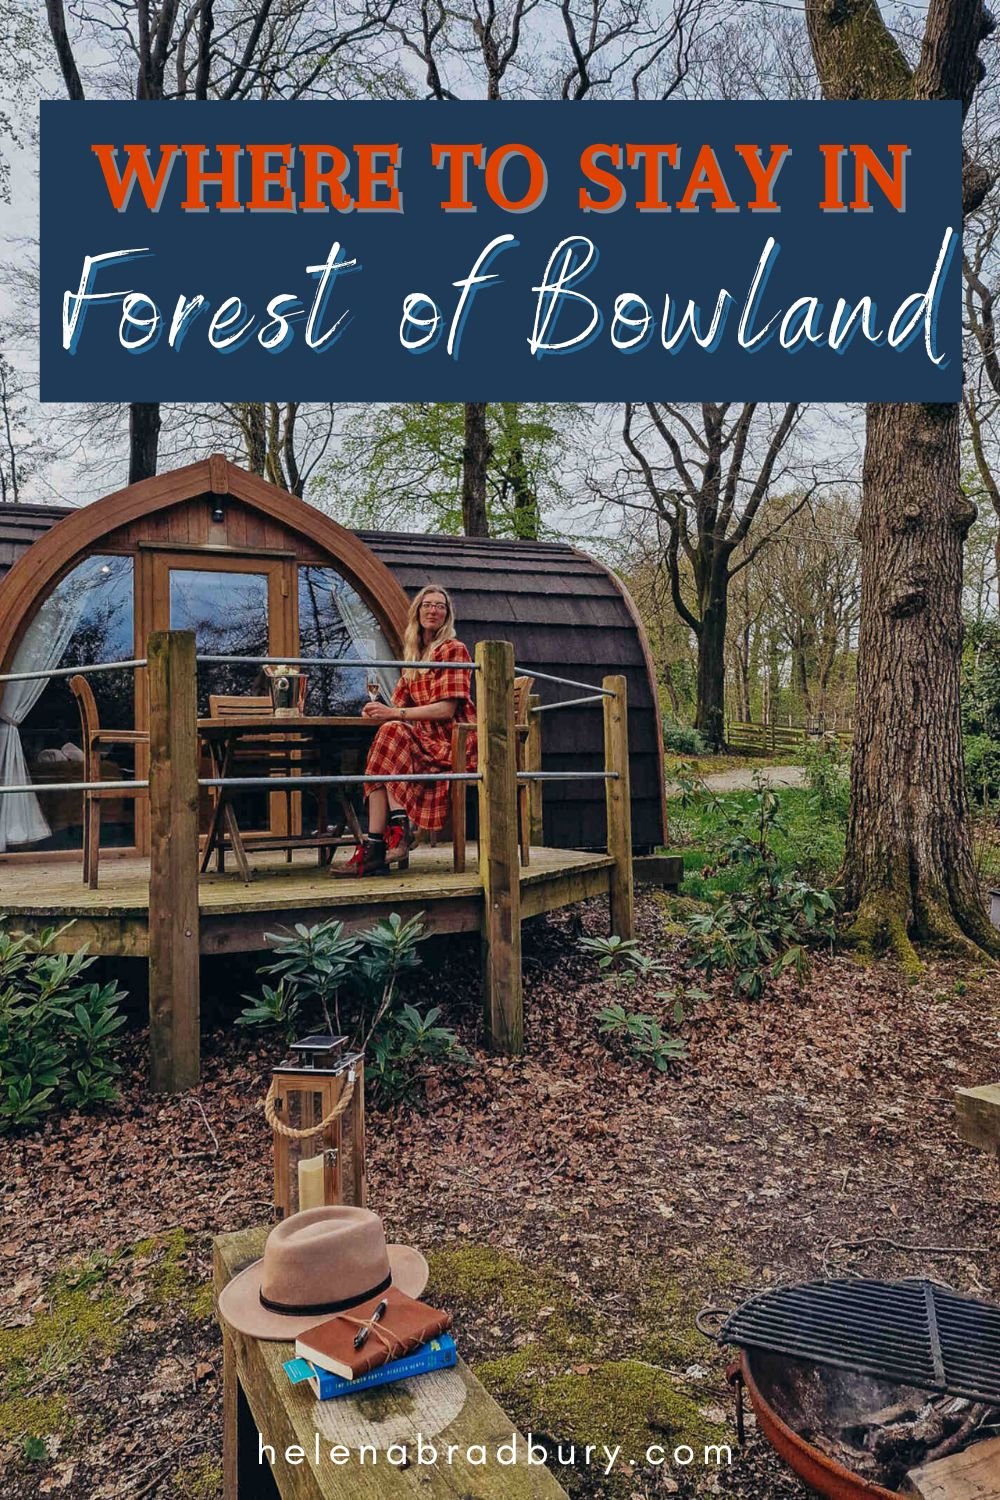 Discover this UK hidden gem with a weekend in the Forest of Bowland with where to stay, where to eat, the best walking trails and the best things to do in the Forest of Bowland. | bowland forest | bowland brewery | trough of bowland | forest of bowla